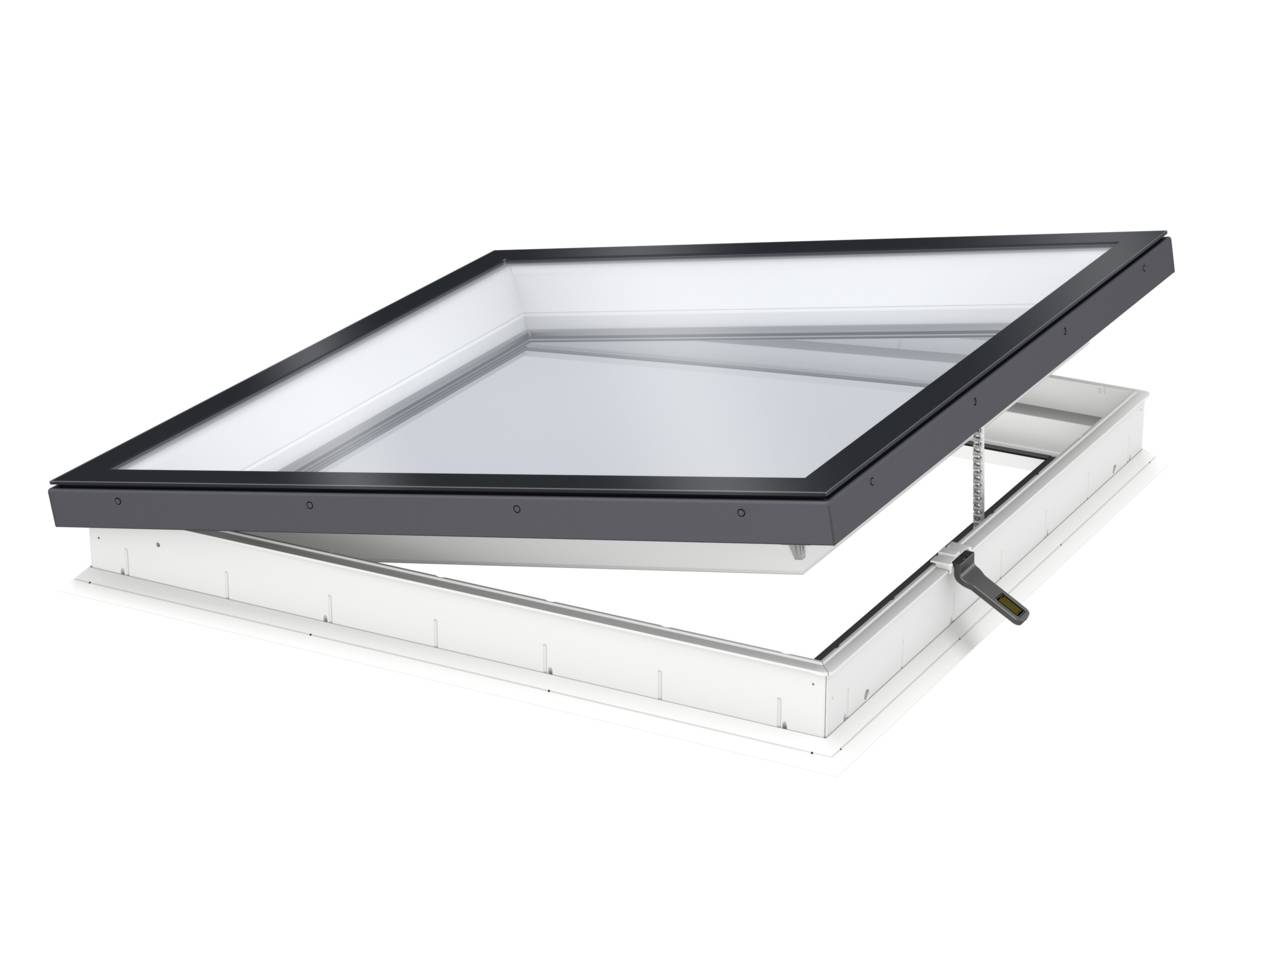 CVU Electrically Operated, Flat Roof Window with Flat Glass Cover                     